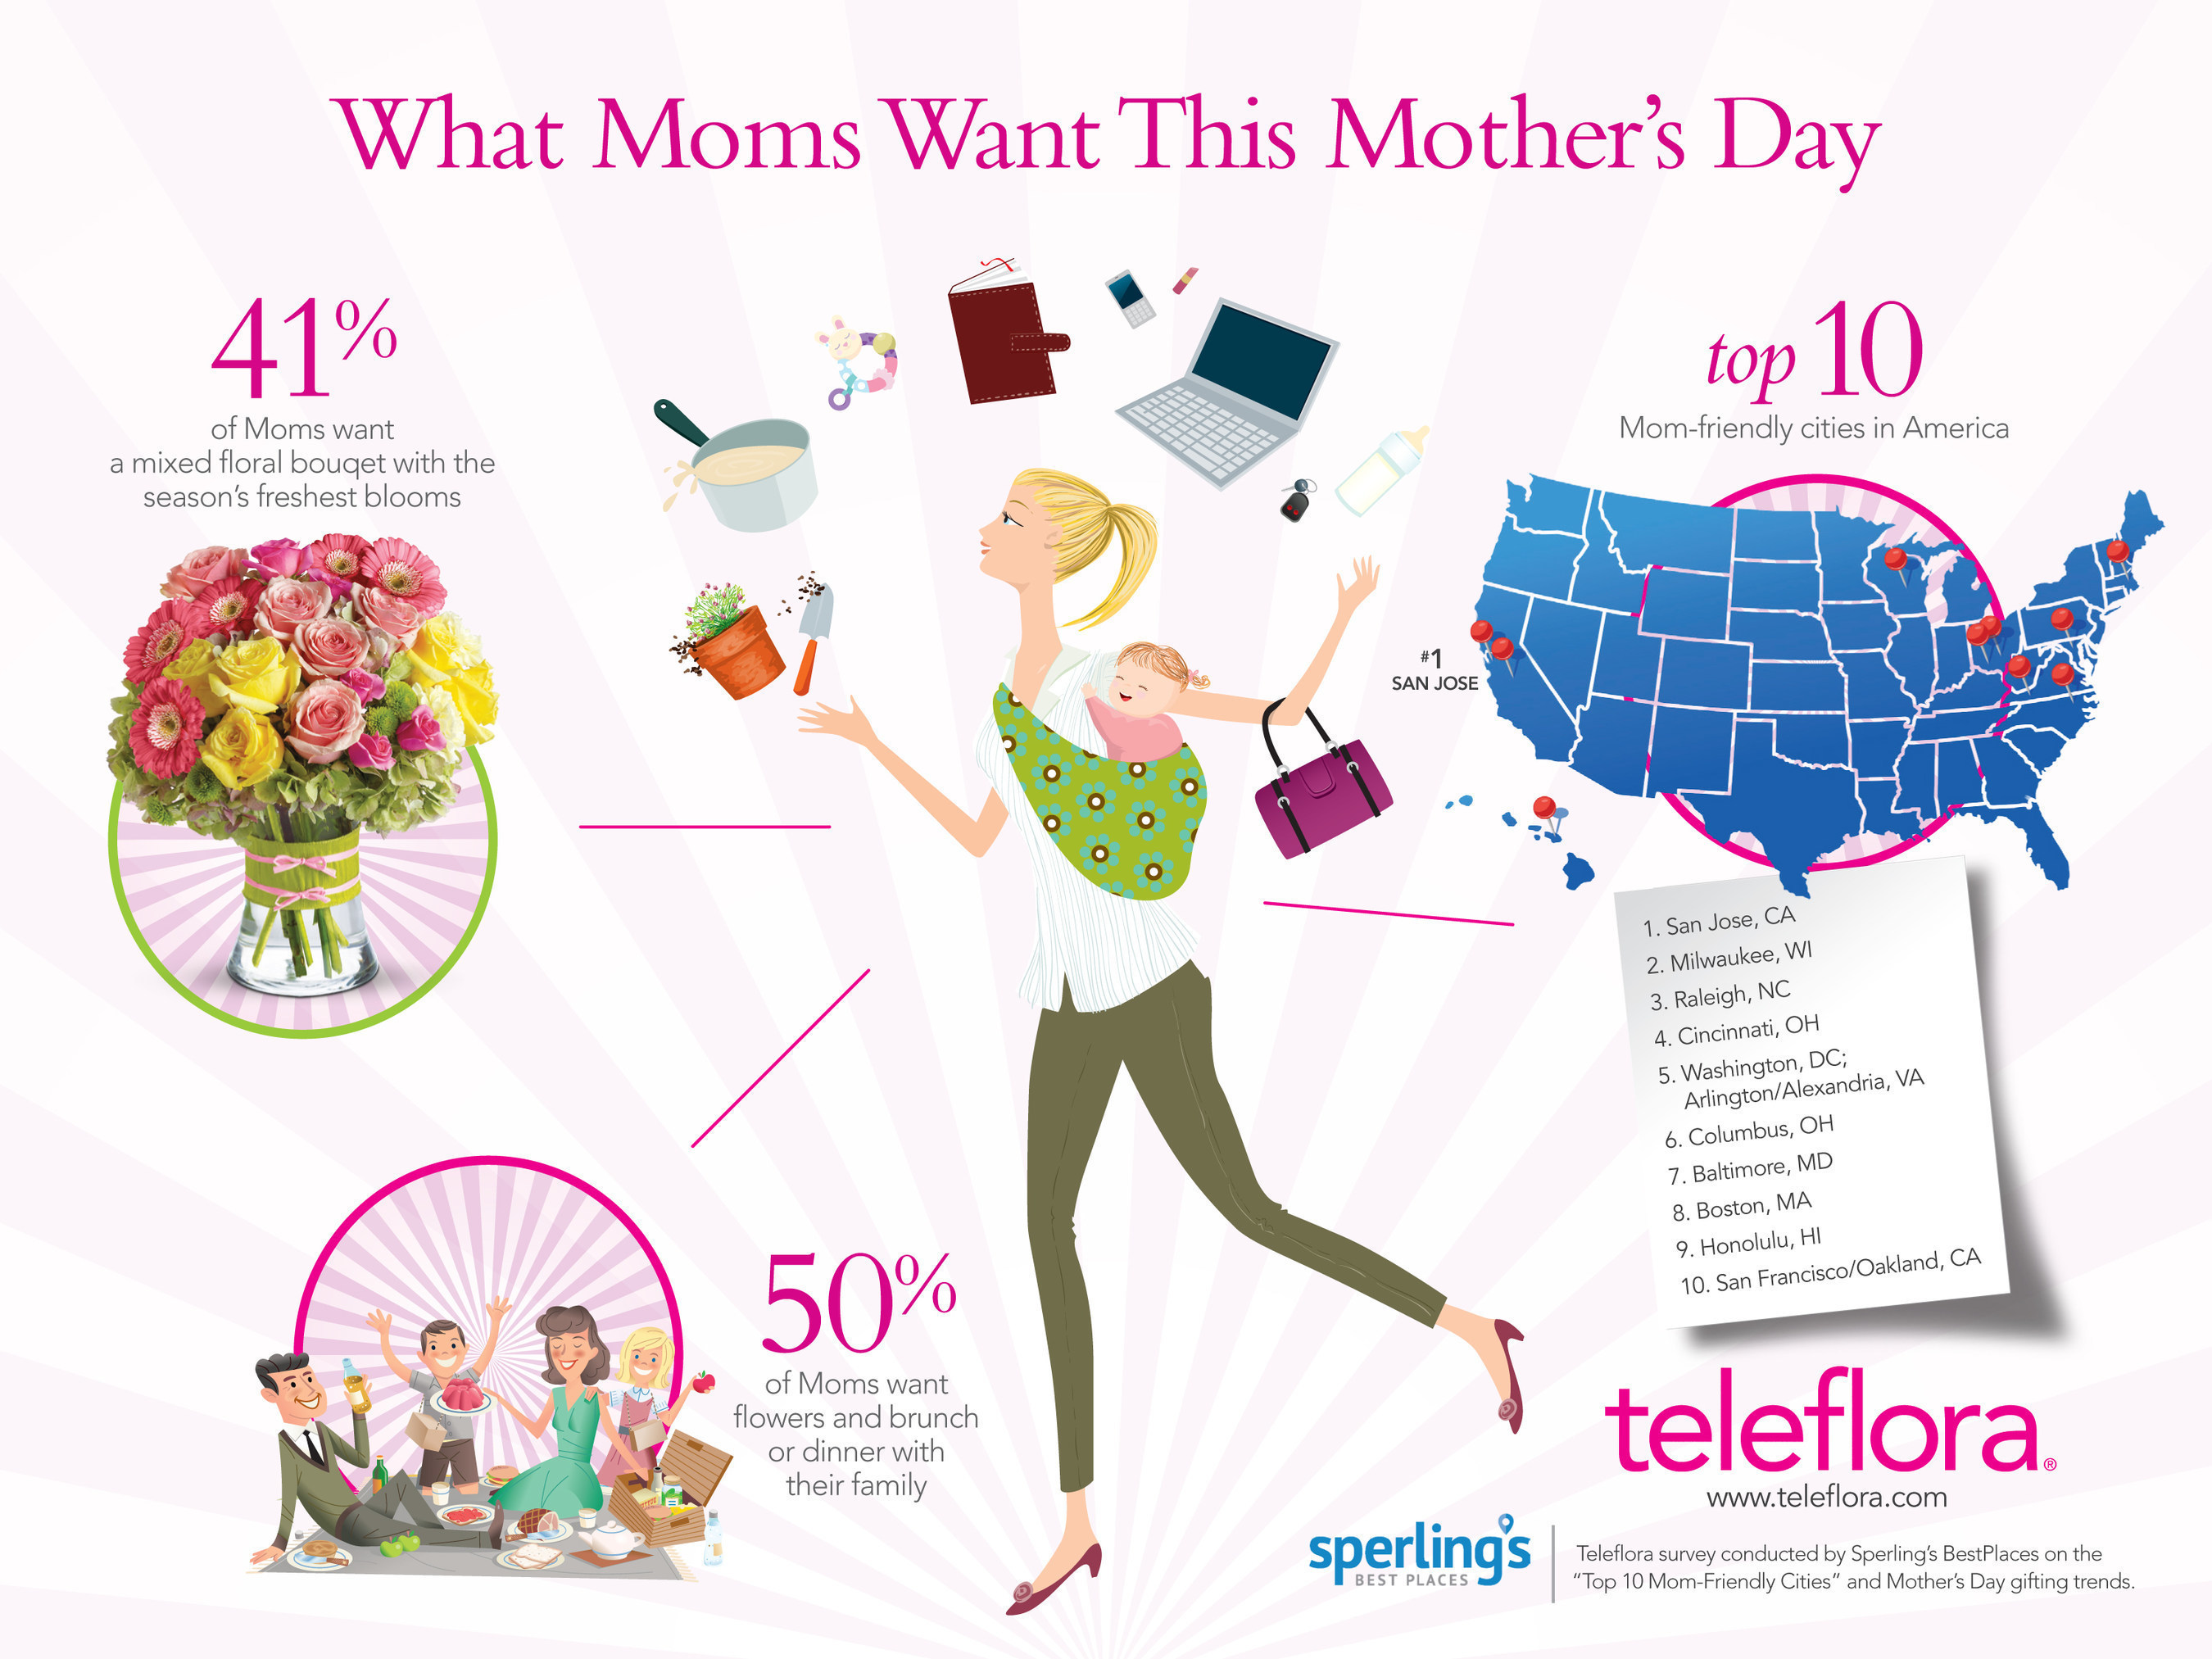 Infographic: "What Moms Want This Mother's Day" (Teleflora survey conducted by Sperling's BestPlaces on the "Top 10 Mom-Friendly Cities" and Mother's Day gifting trends.)